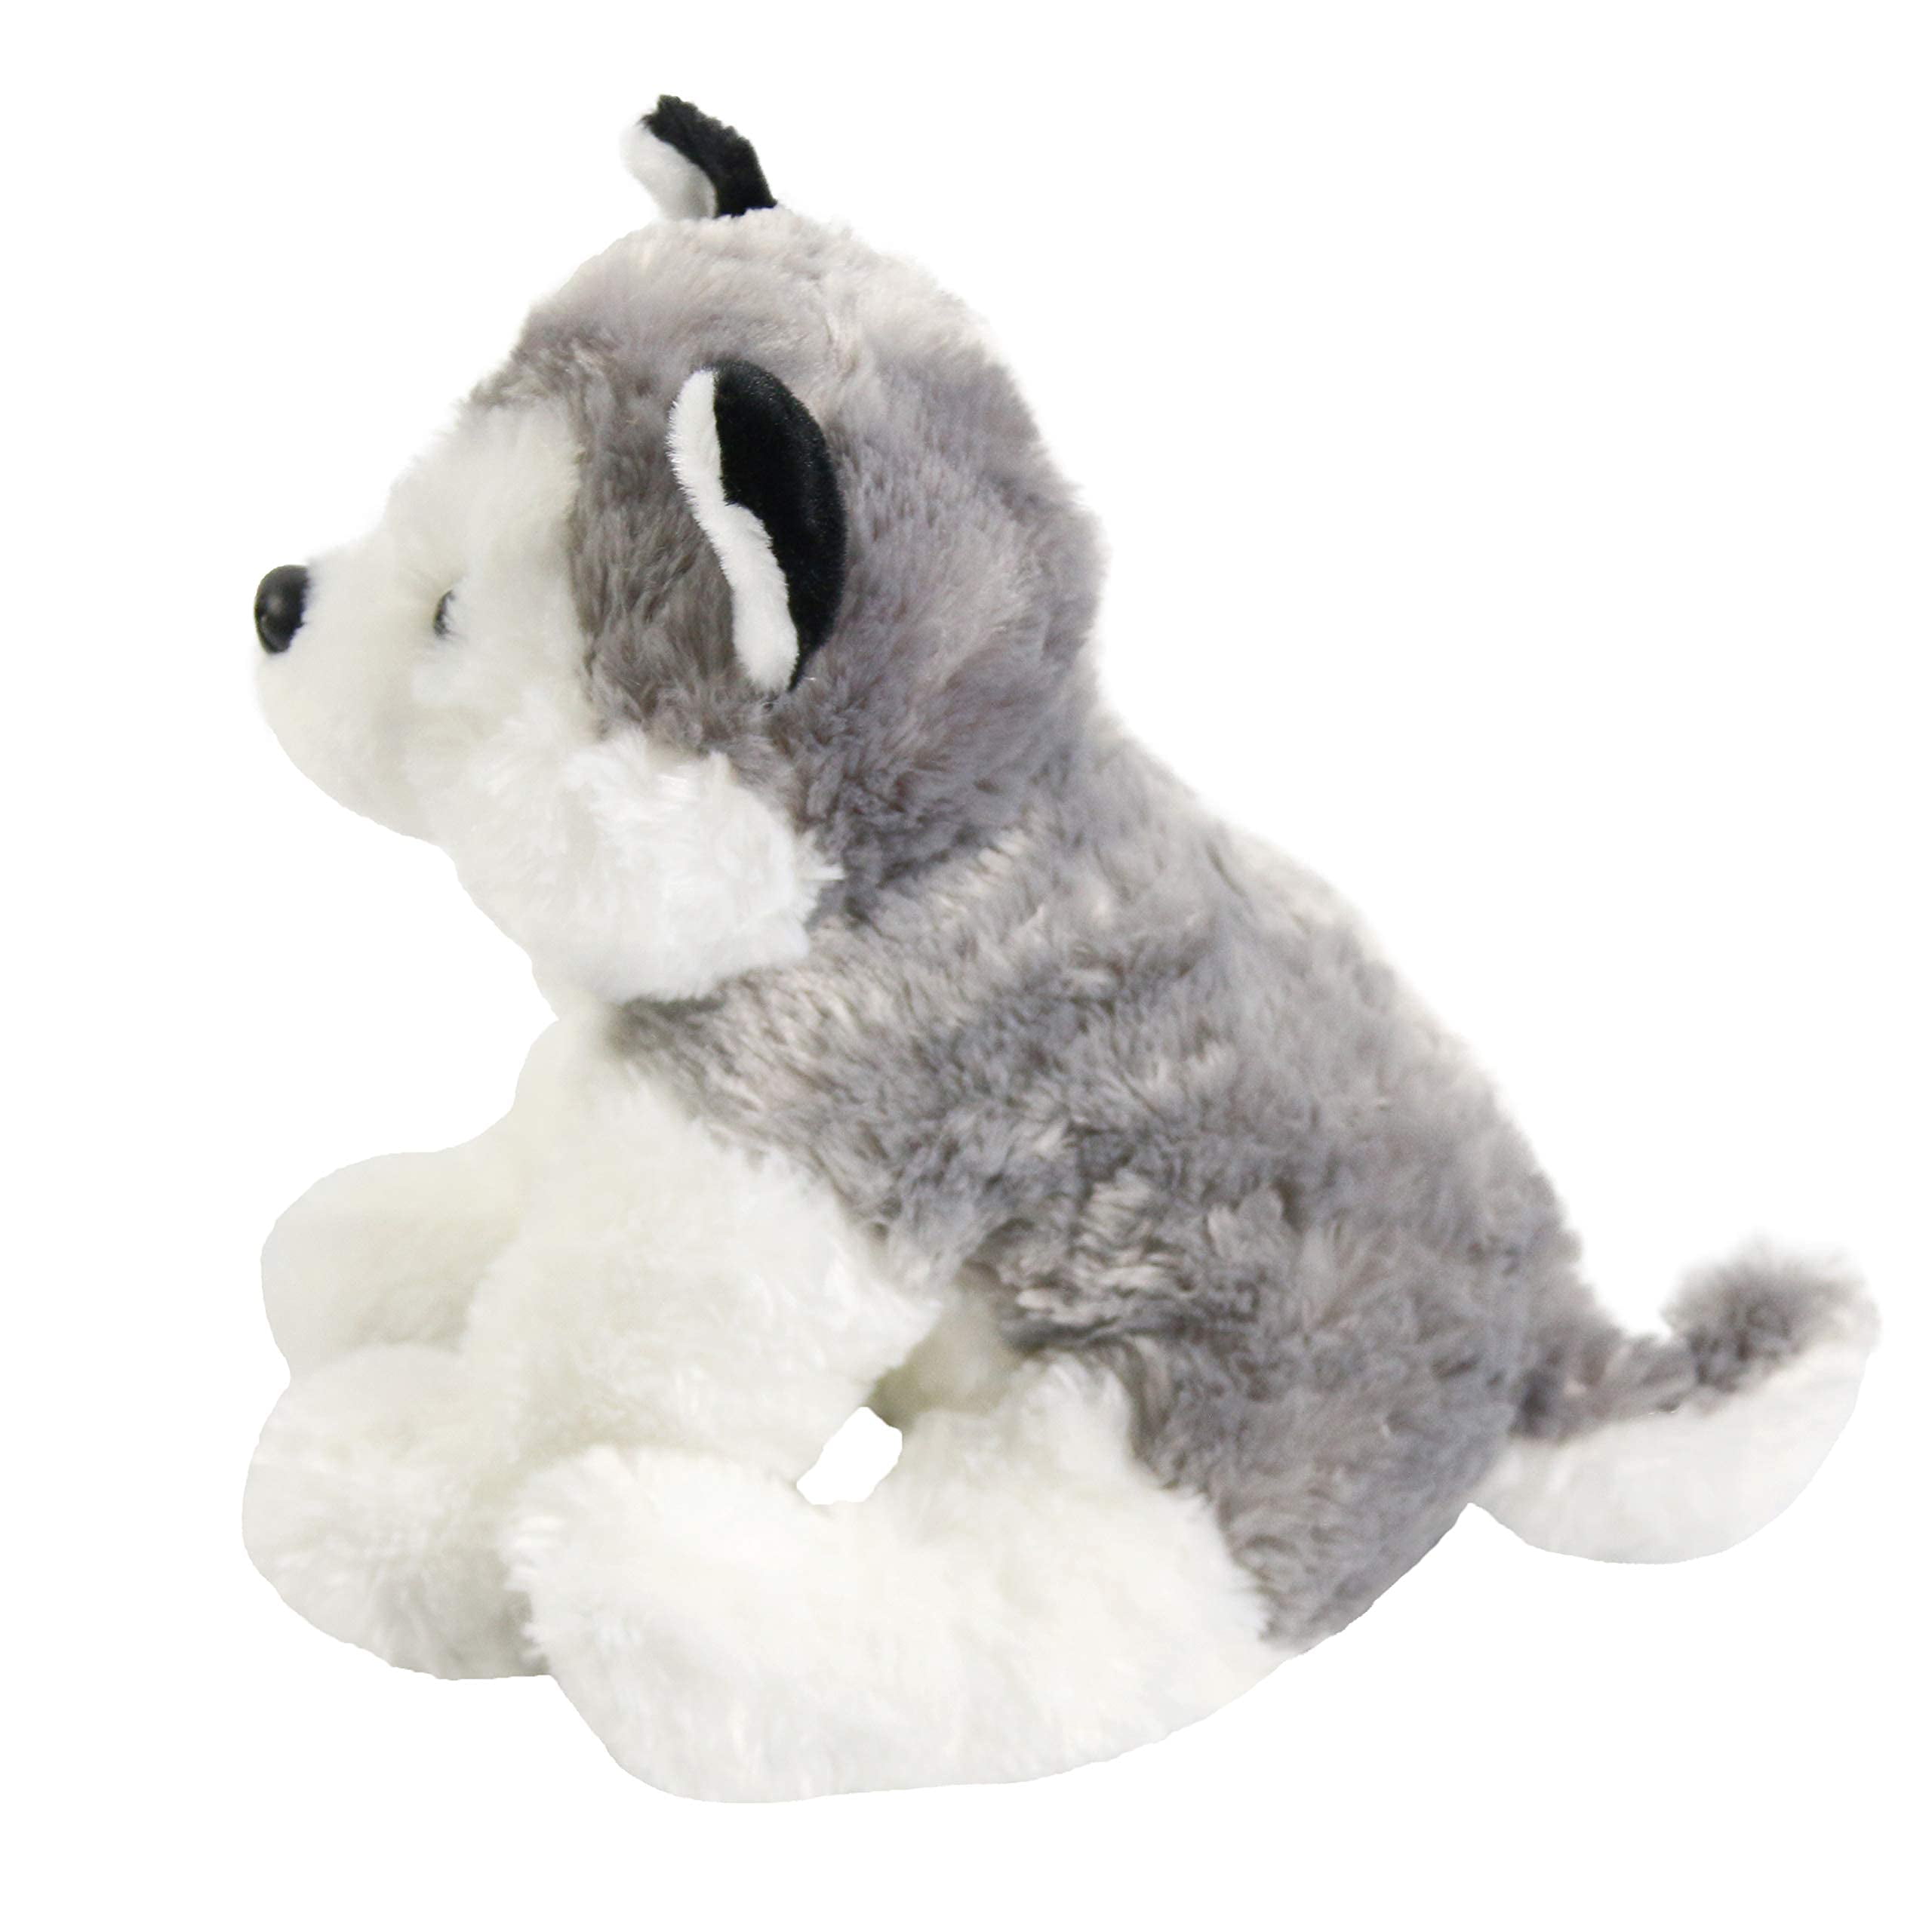  Enhopty 12 Husky Dogs Plush Husky Wolf Stuffed Animal Toys  Puppy Doll Simulation Dog Ornaments Soft Cuddle Adorable Gifts for Girls  Boys Toddlers on Birthday Children's Day : Toys & Games